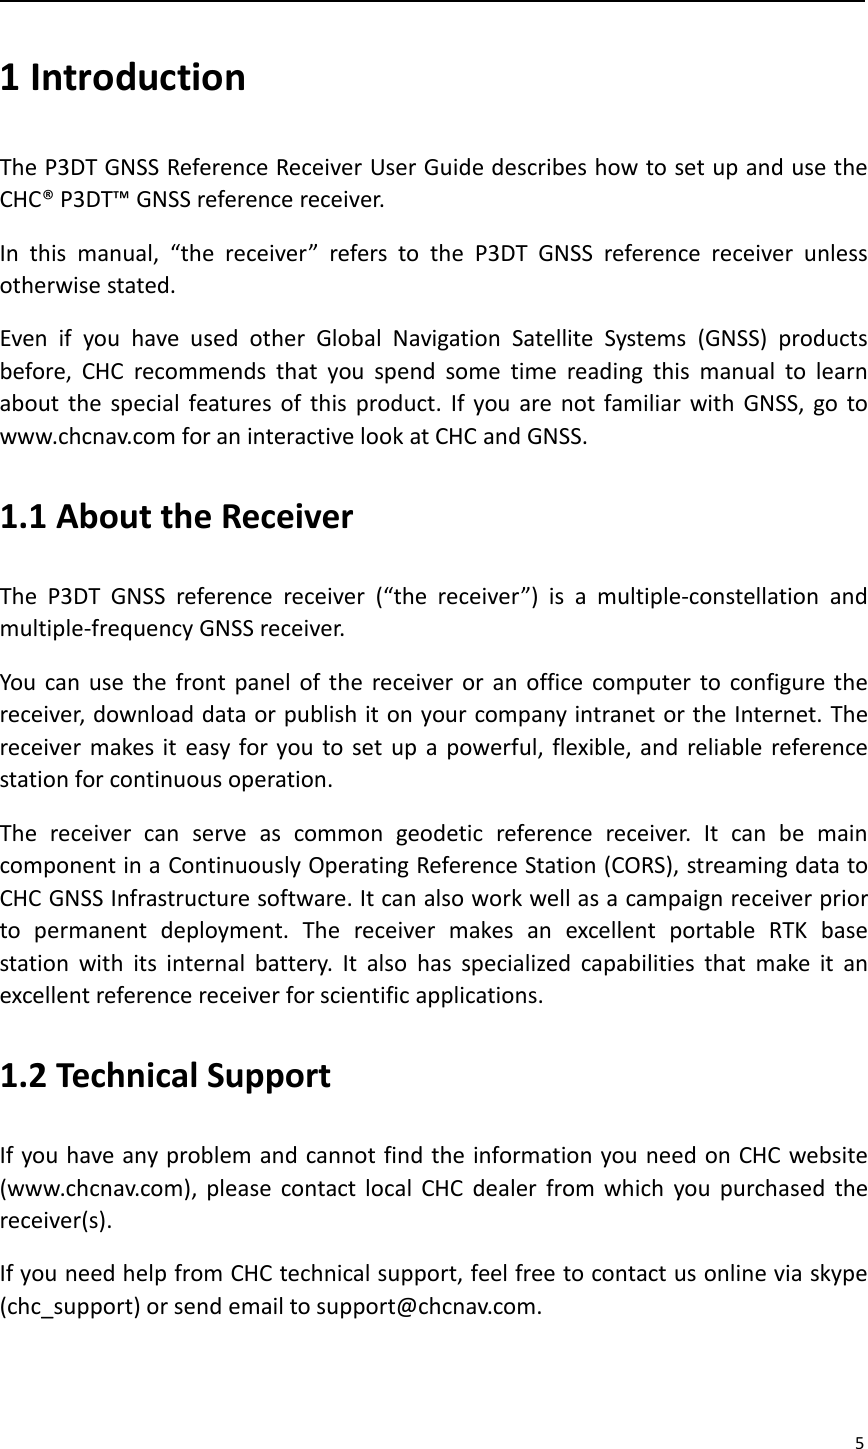 Page 5 of Huace Navigation Technology A02025 Geodetic GNSS Receiver P3DT User Manual 